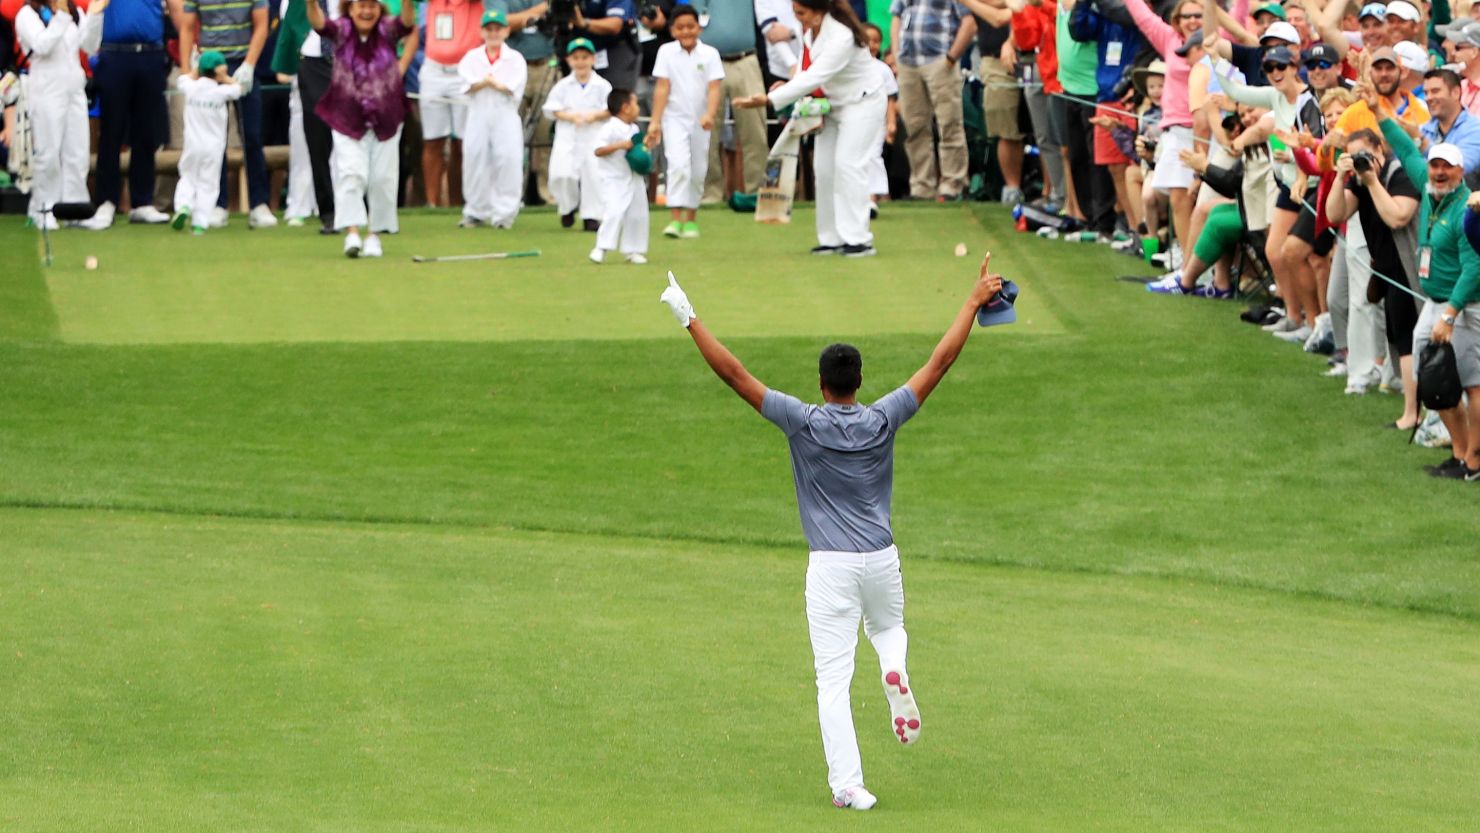 Tony Finau celebrates a hole-in-one before dislocating his ankle at Augusta.